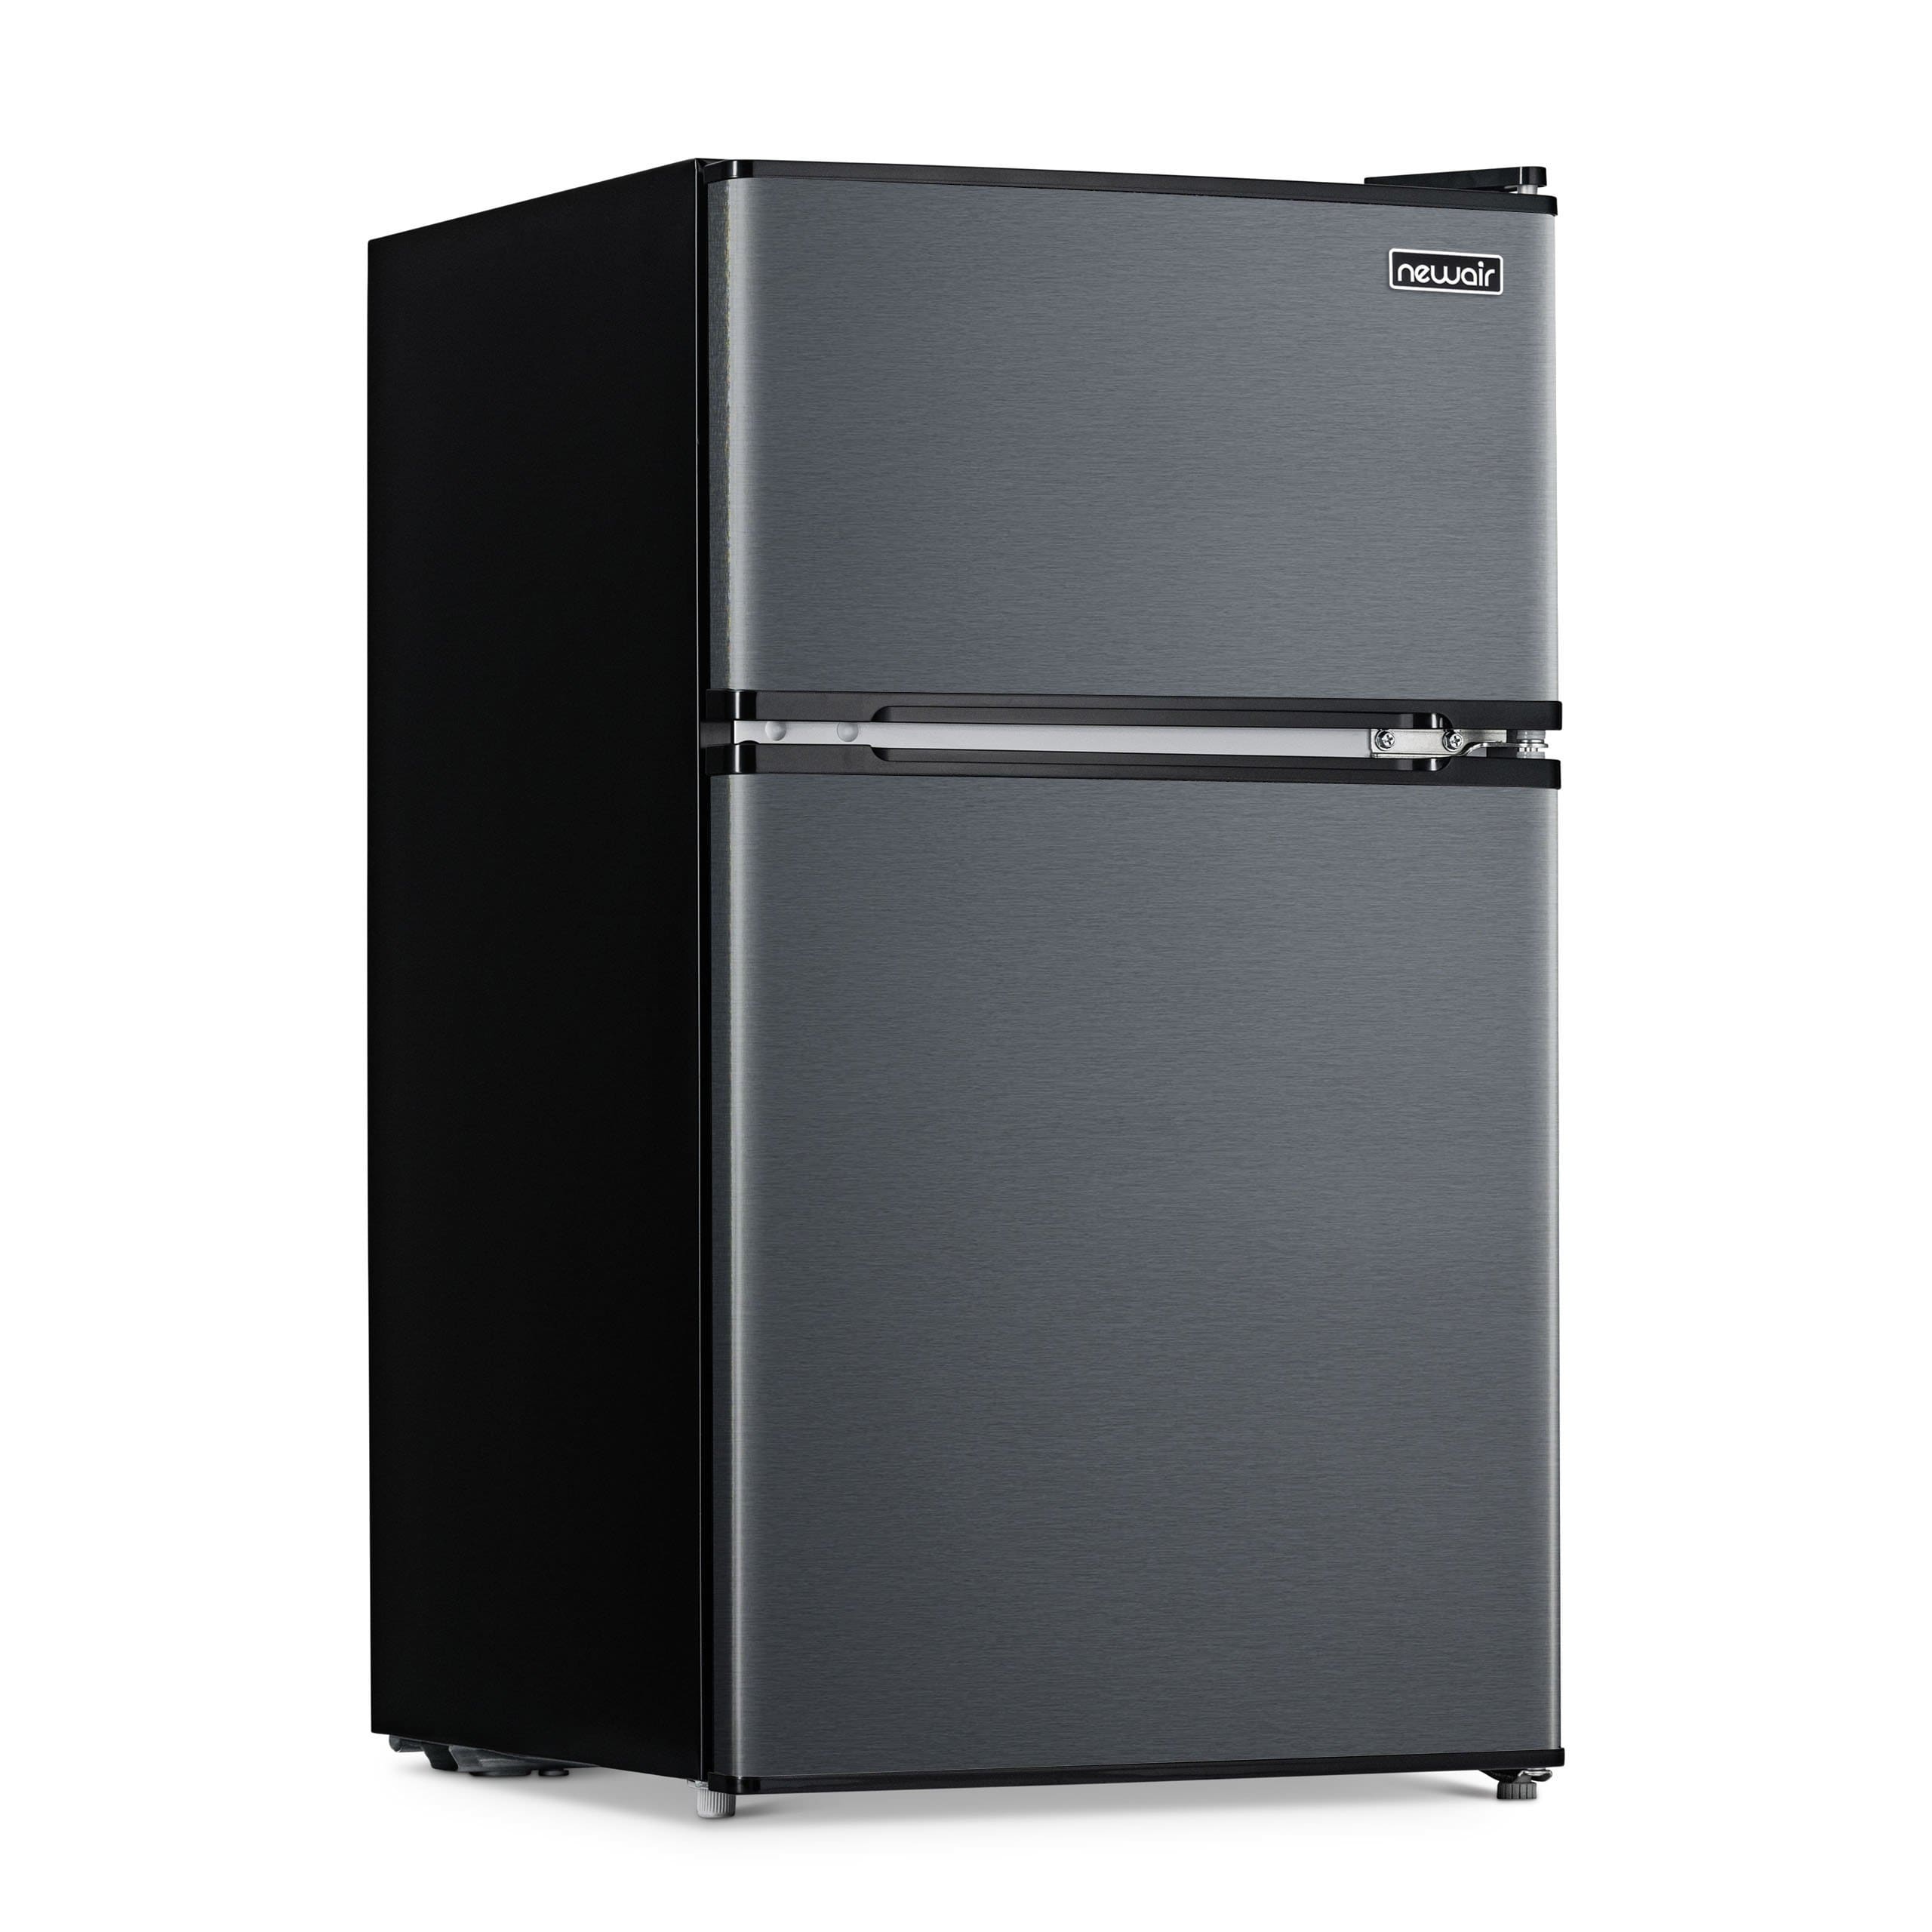 NewAir 3.1 Cu. Ft. Black Compact Mini Refrigerator with Freezer, Auto Defrost, Can Dispenser and Energy Star